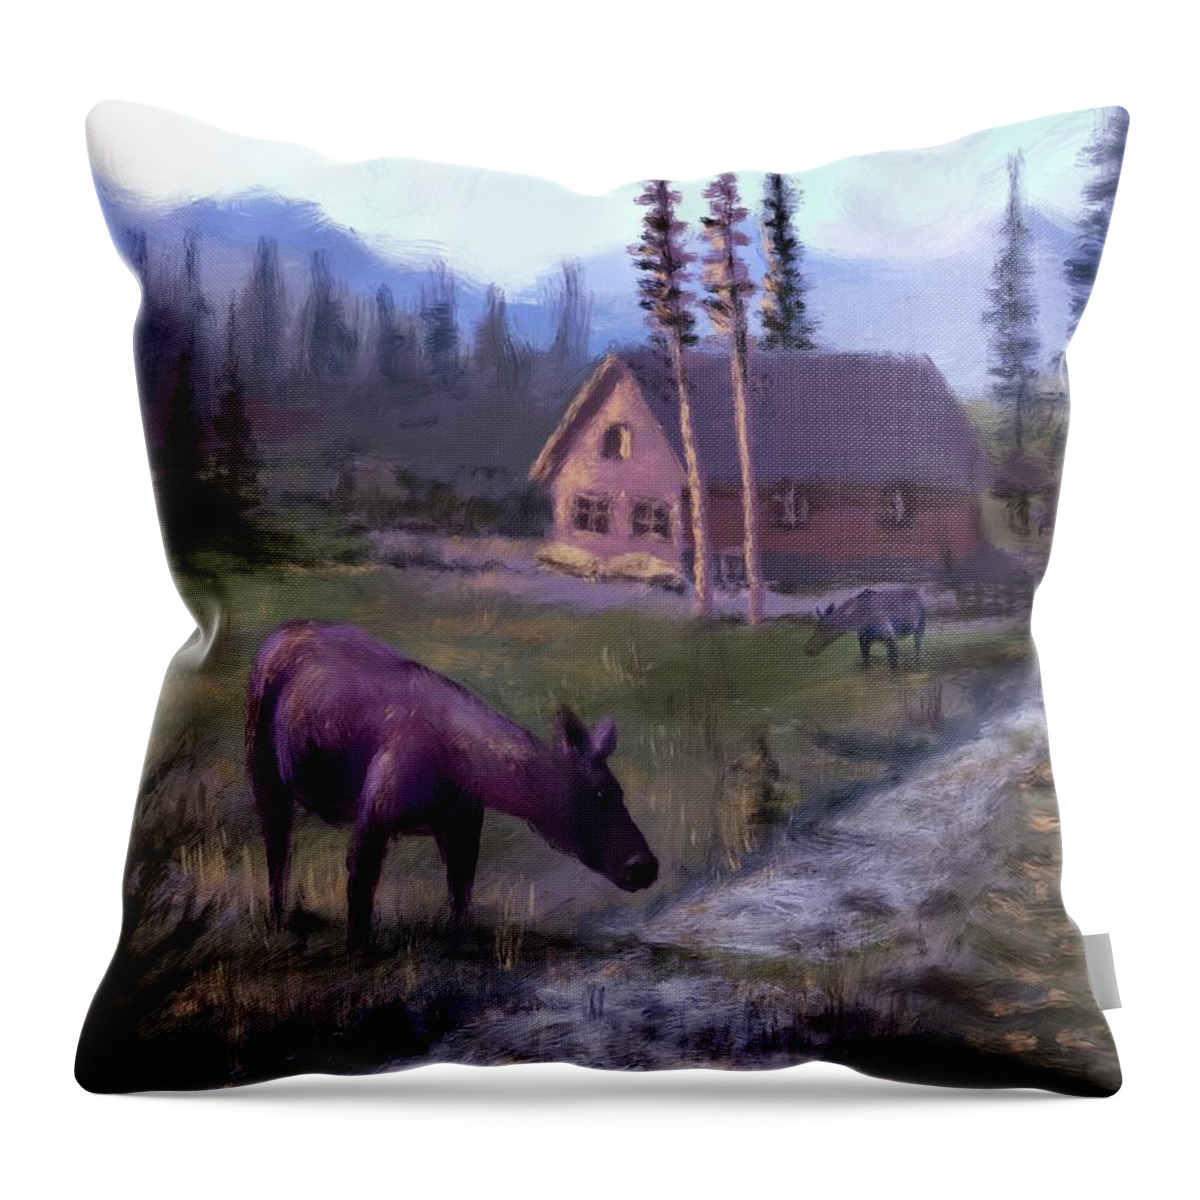 Moose Throw Pillow featuring the digital art Moose Creek by Larry Whitler